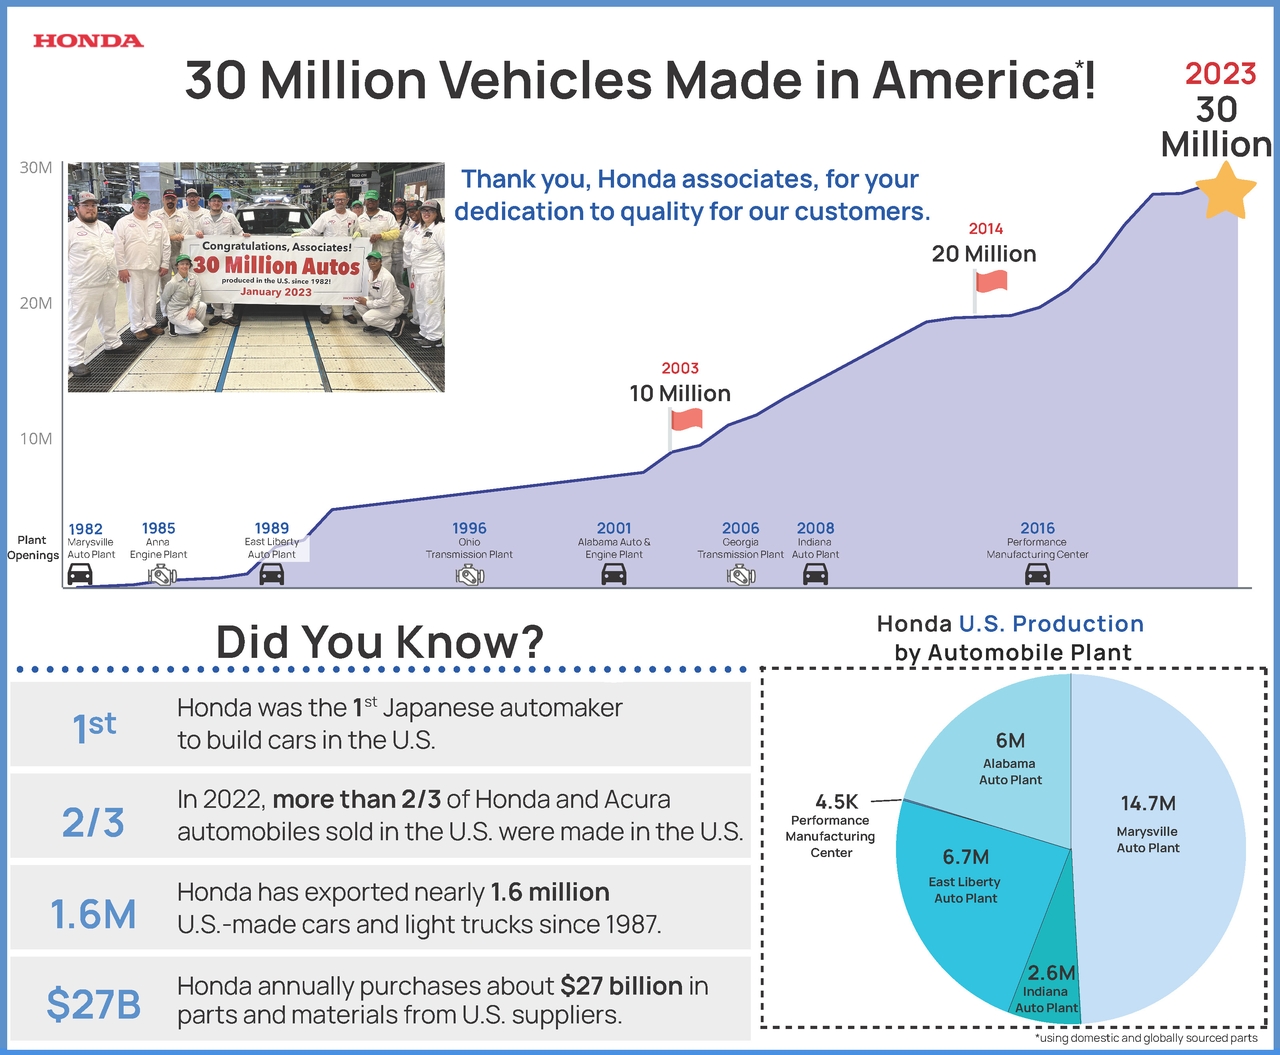 Honda produced 30 million vehicles in the US